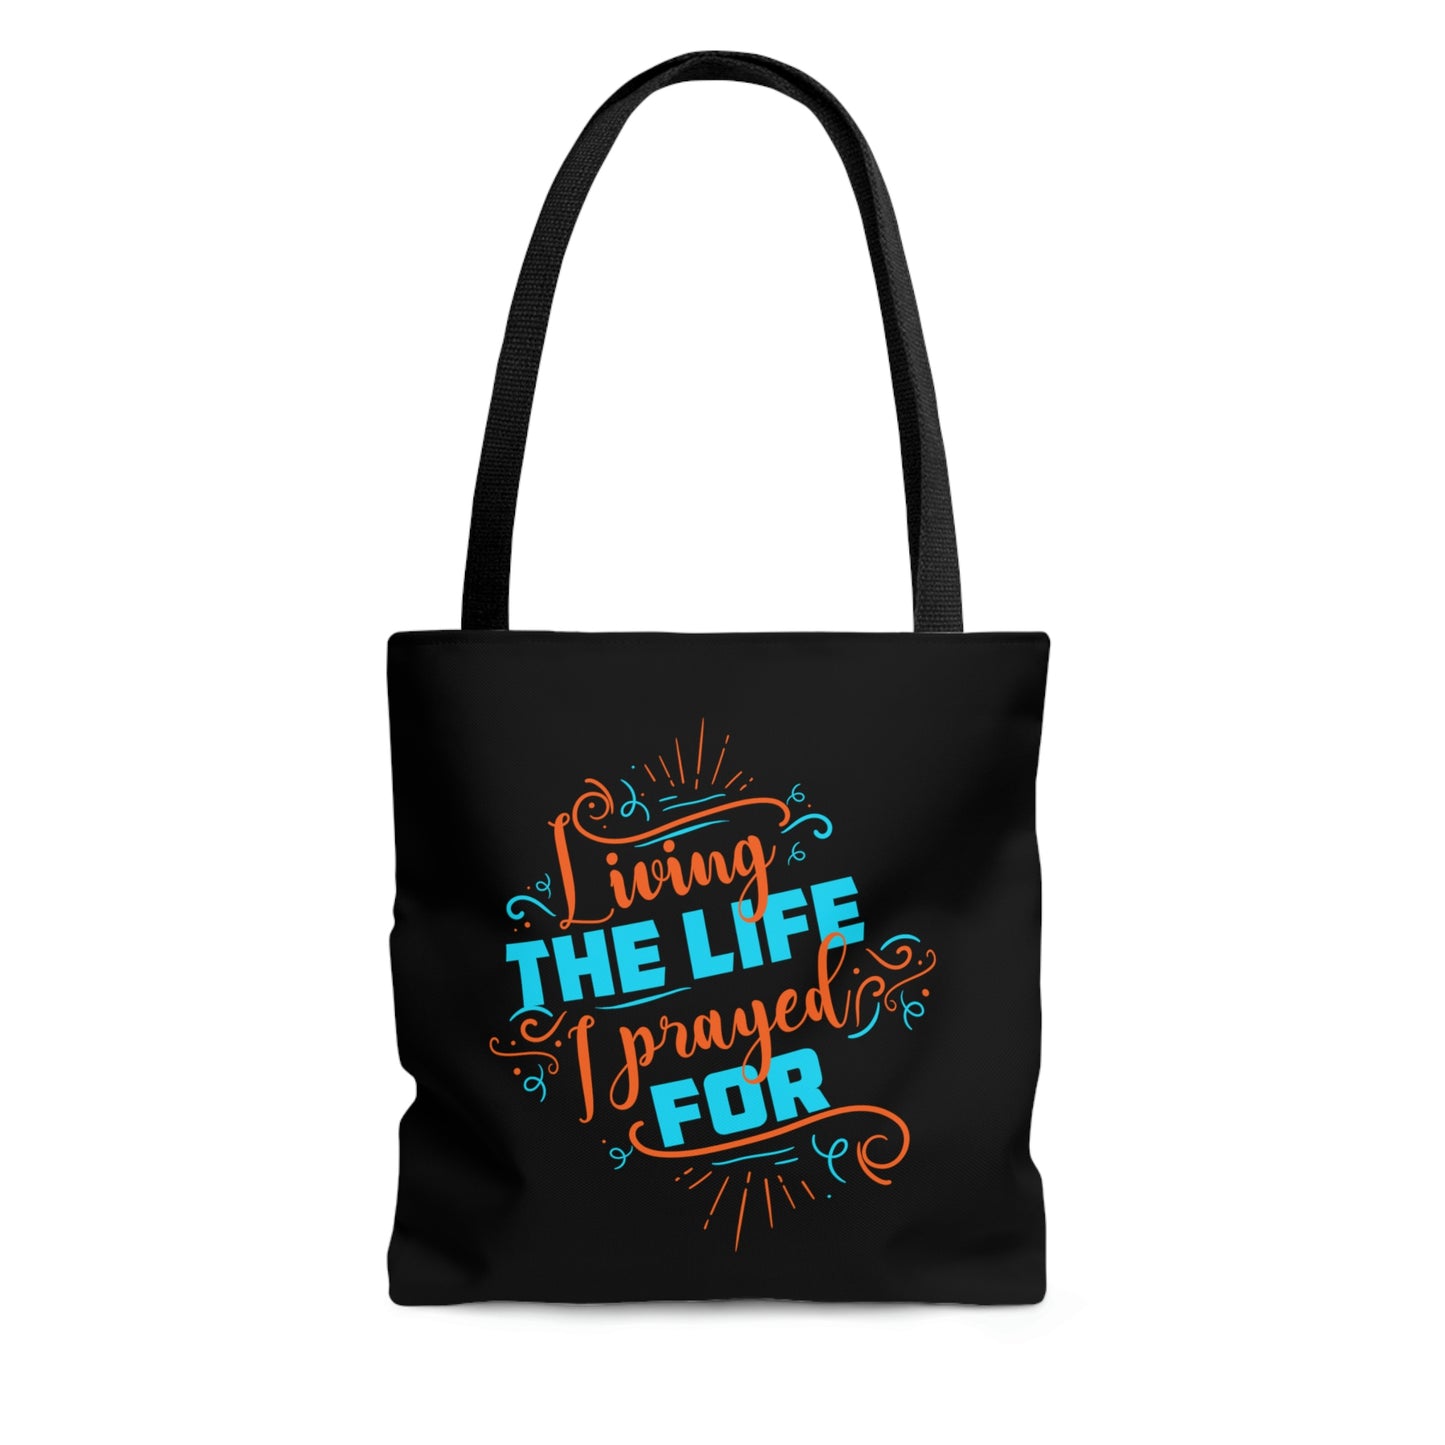 Living The Life I Prayed For Tote Bag